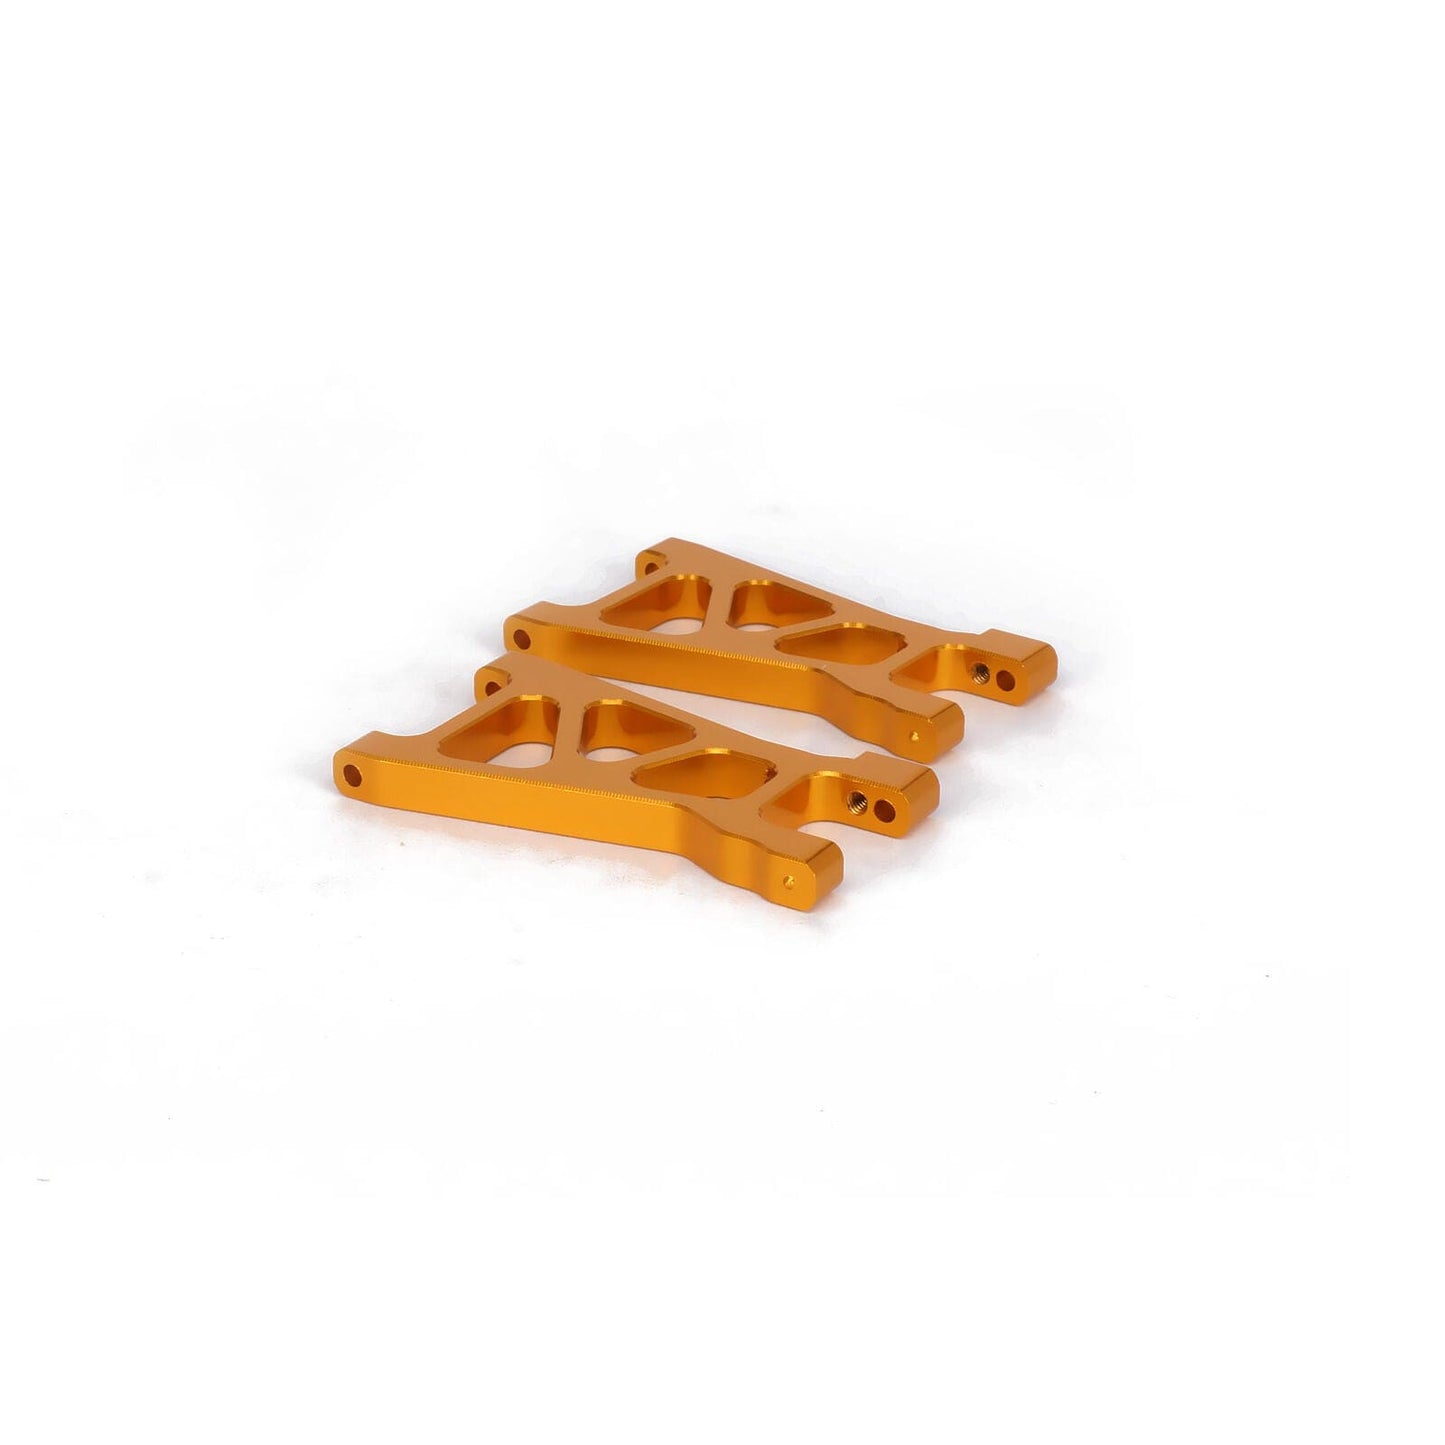 RCAWD HIMOTO UPGRADE PARTS Yellow RCAWD Alloy Rear Lower Suspension Arm M606 23606 For RC Car 1/18 Himoto E18 2pcs